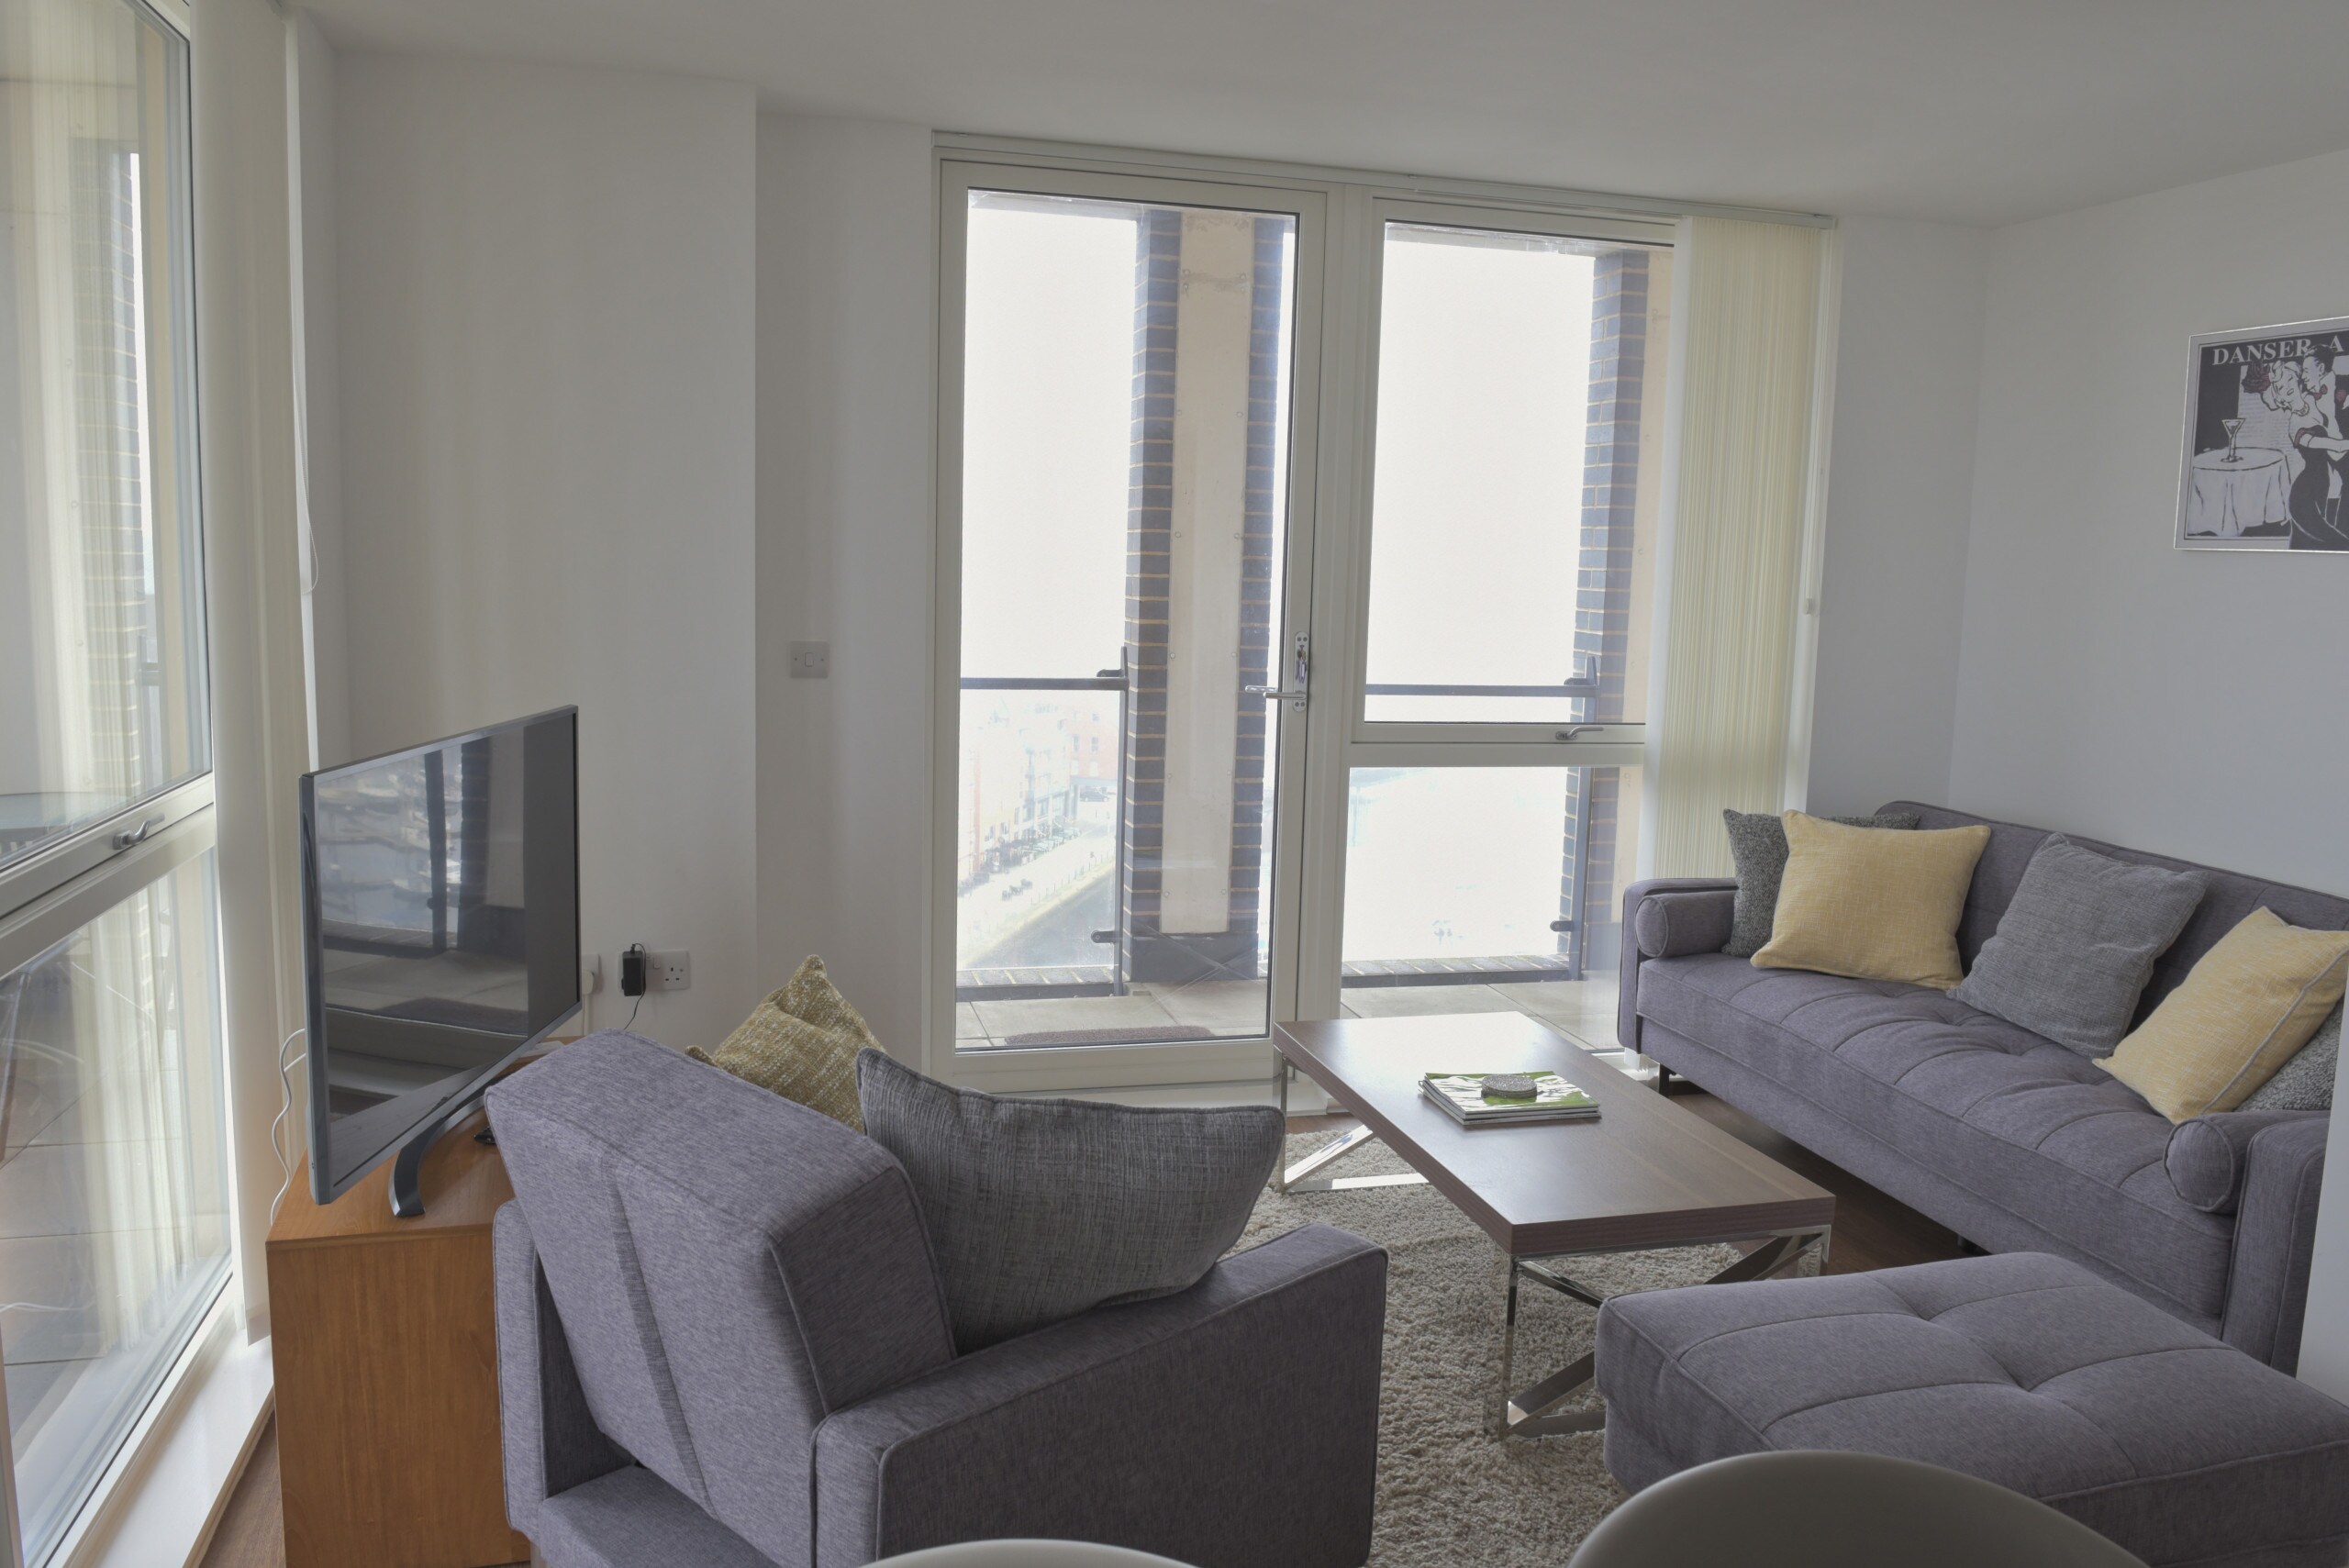 Property Image 1 - 1 Bedroom 10th Floor (with lift), balcony and wide views over the Waterfront. Allocated parking space (ind